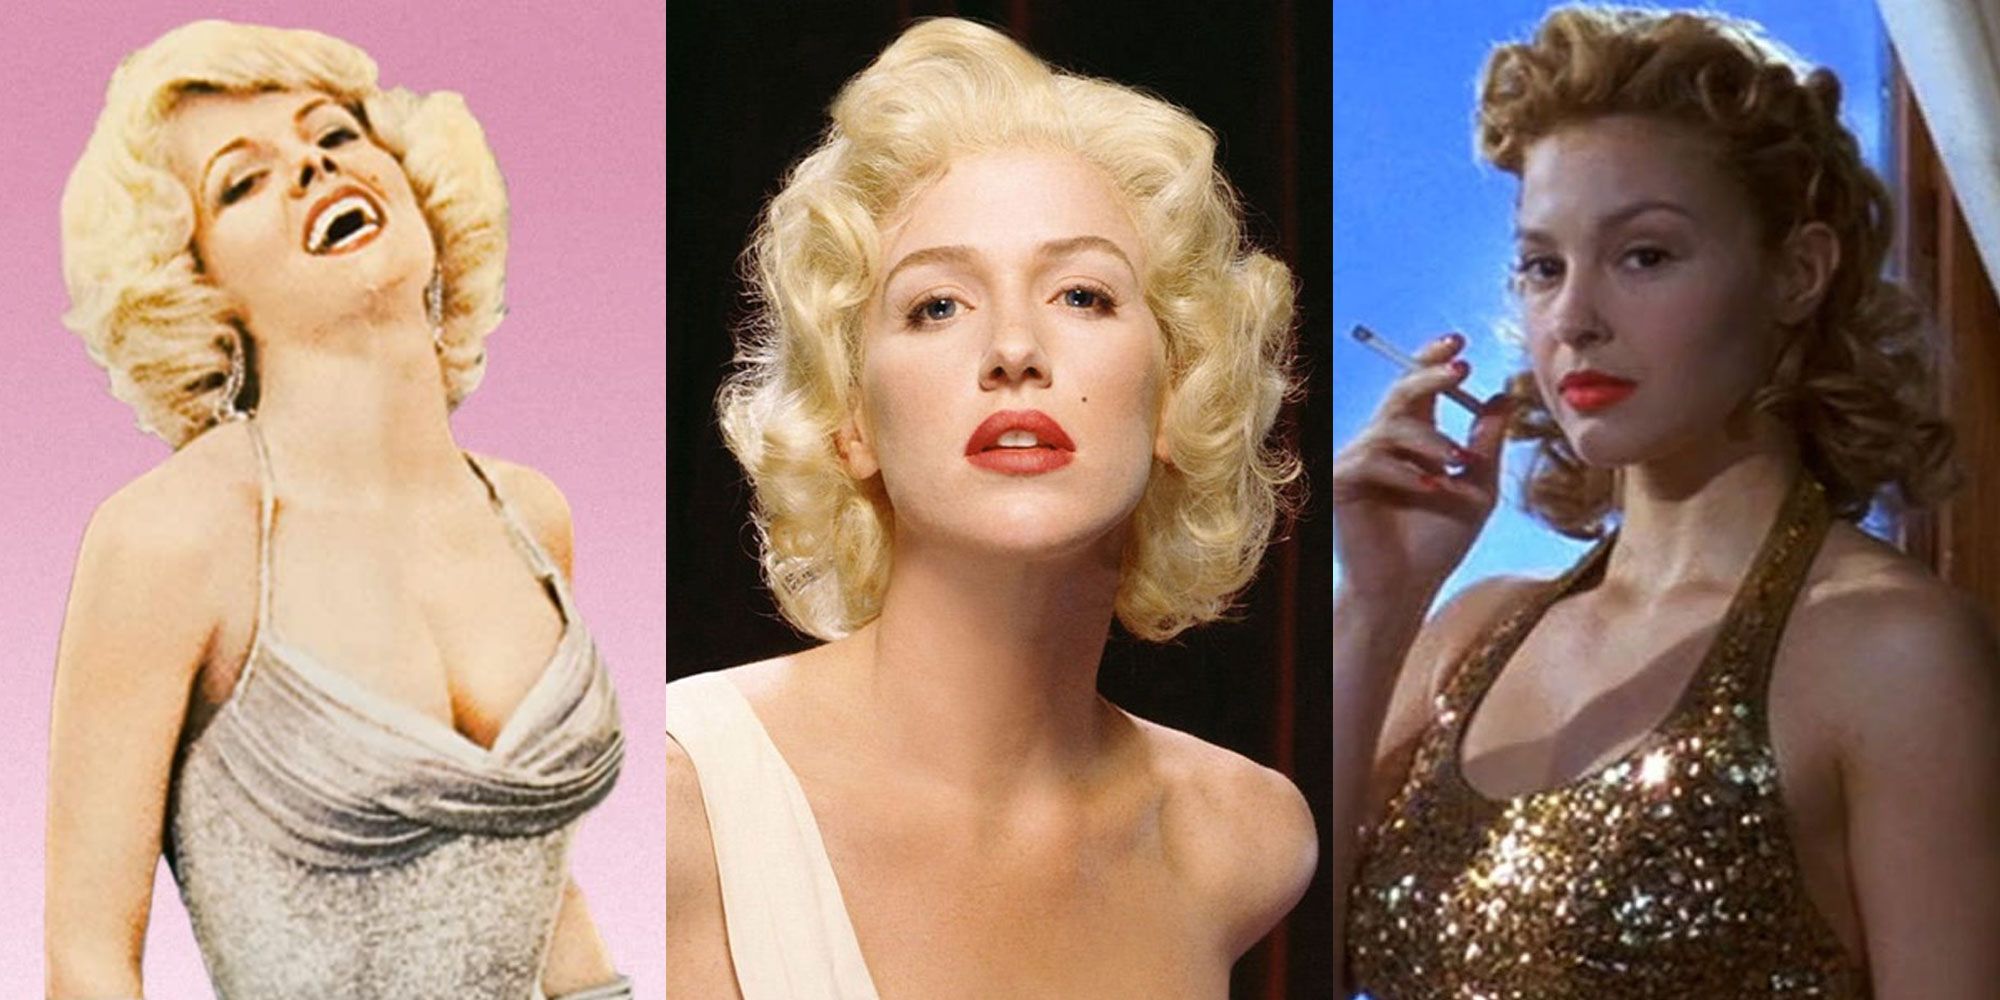 Marilyn Monroe: Her life, movie and TV portrayals, including 'Blonde